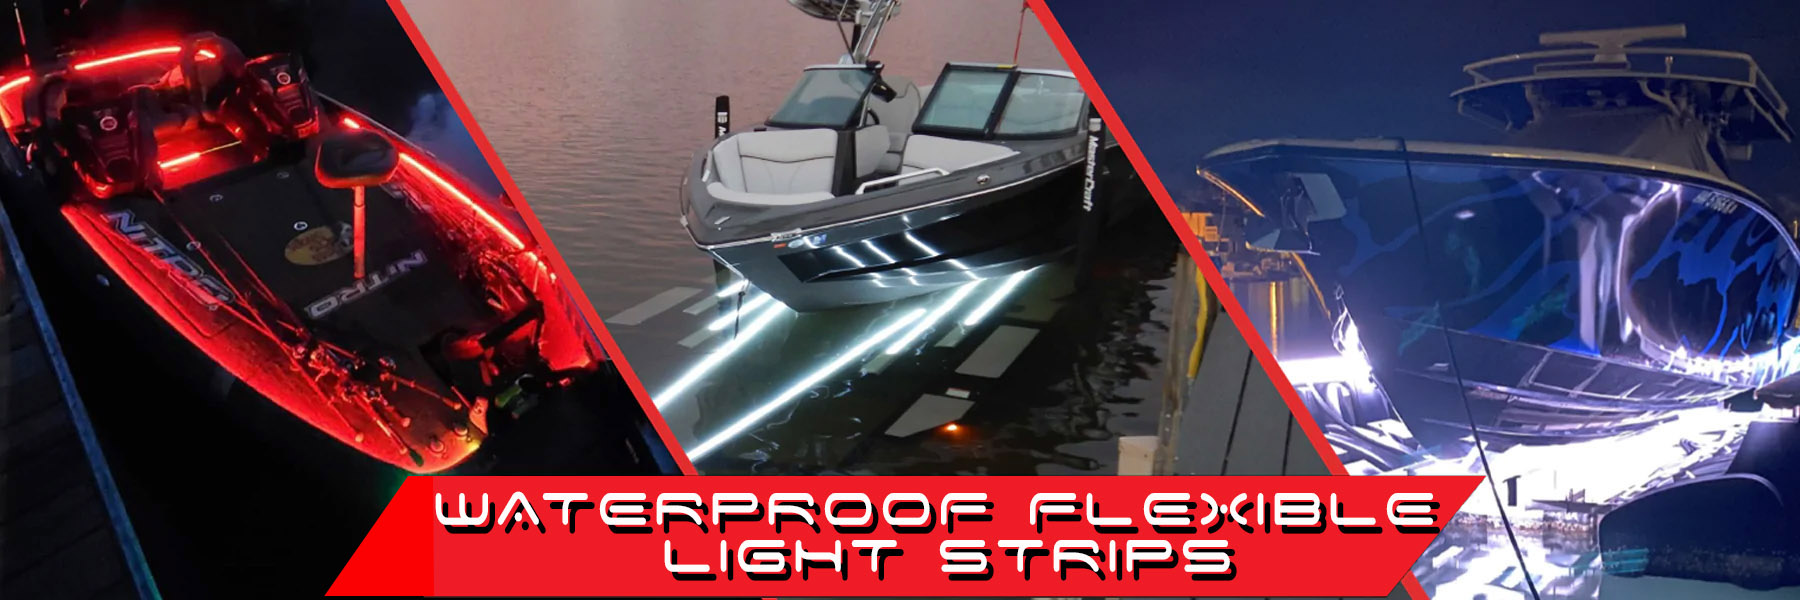 Waterproof Led Strip Lights For Boats